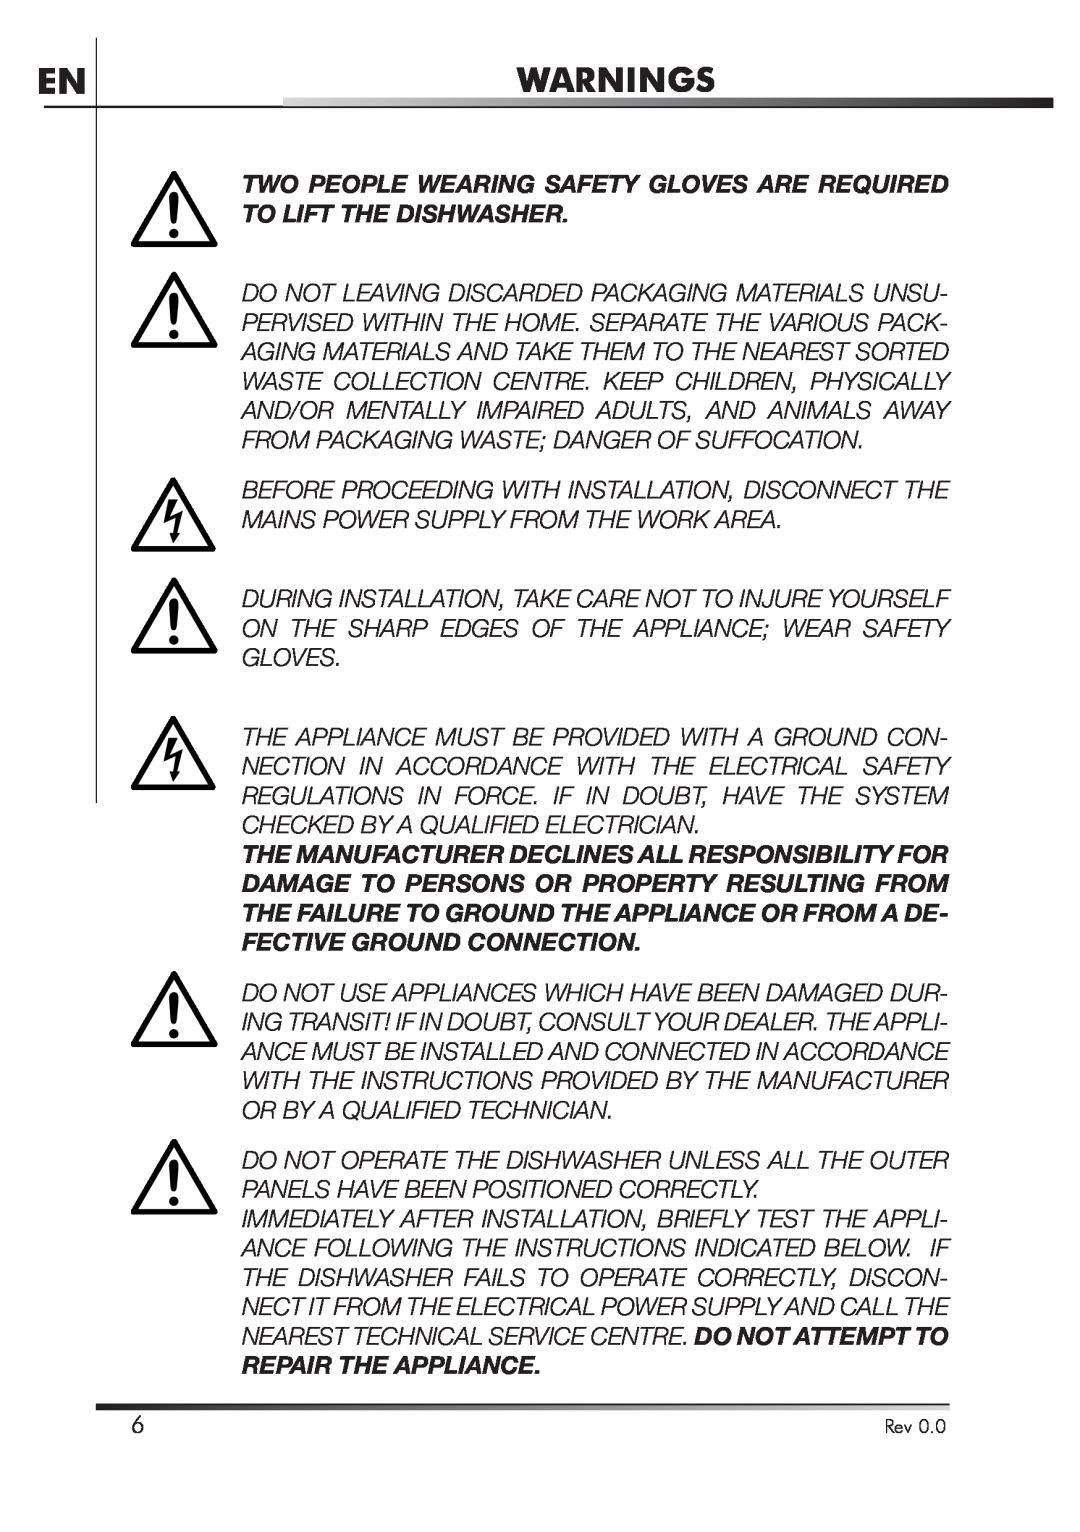 Smeg STA4645U manual Warnings, Two People Wearing Safety Gloves Are Required To Lift The Dishwasher, Repair The Appliance 